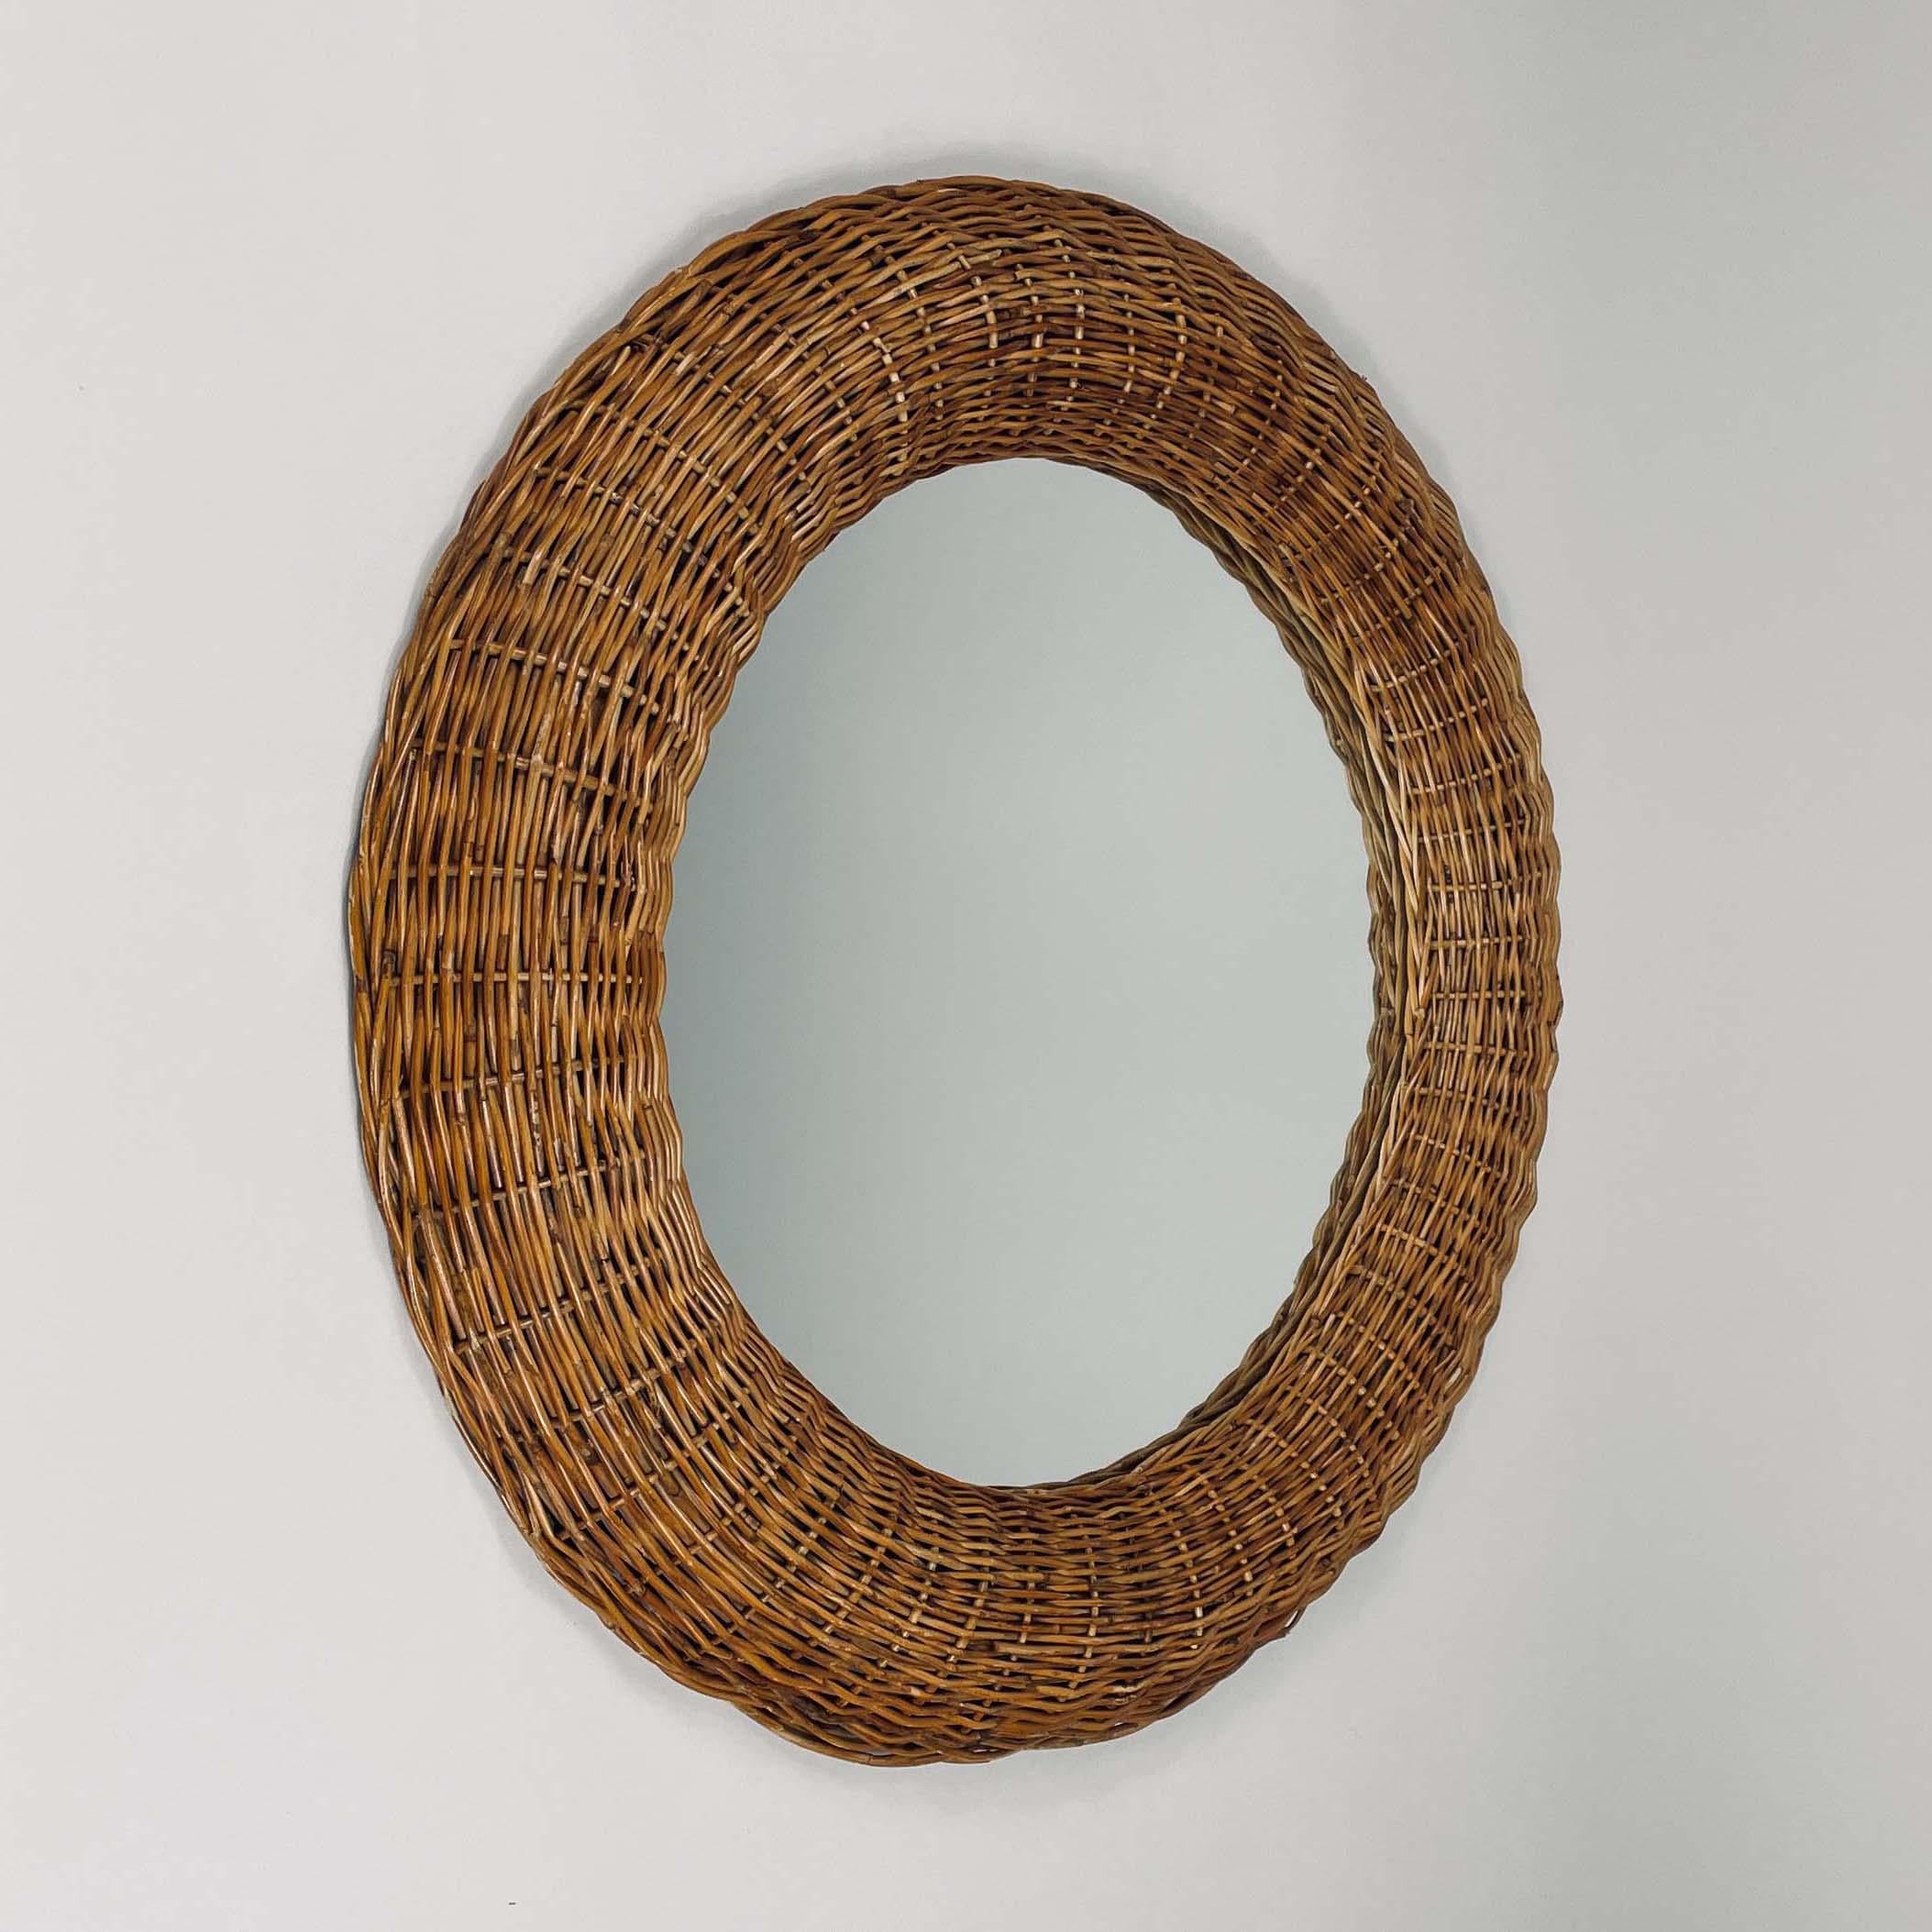 Riviera Style Round Woven Rattan Mirror, France 1950s For Sale 11